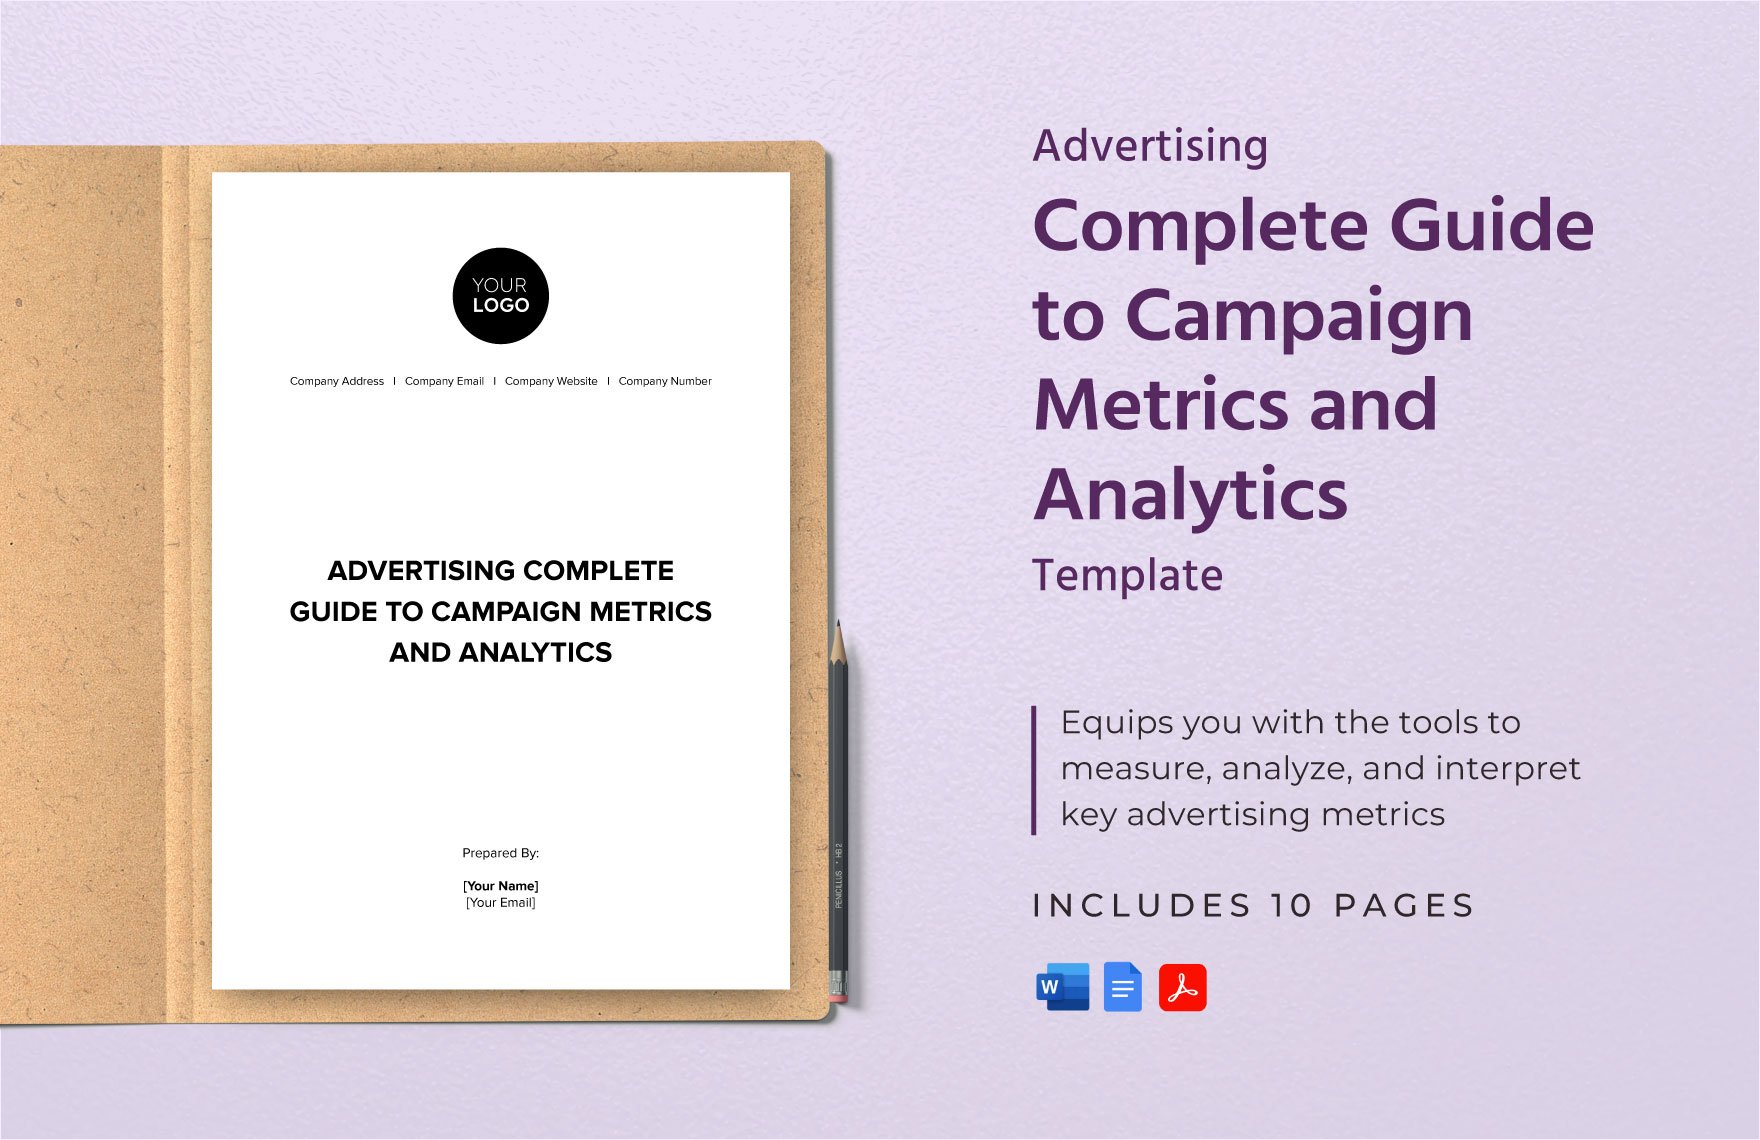 Advertising Complete Guide to Campaign Metrics and Analytics Template